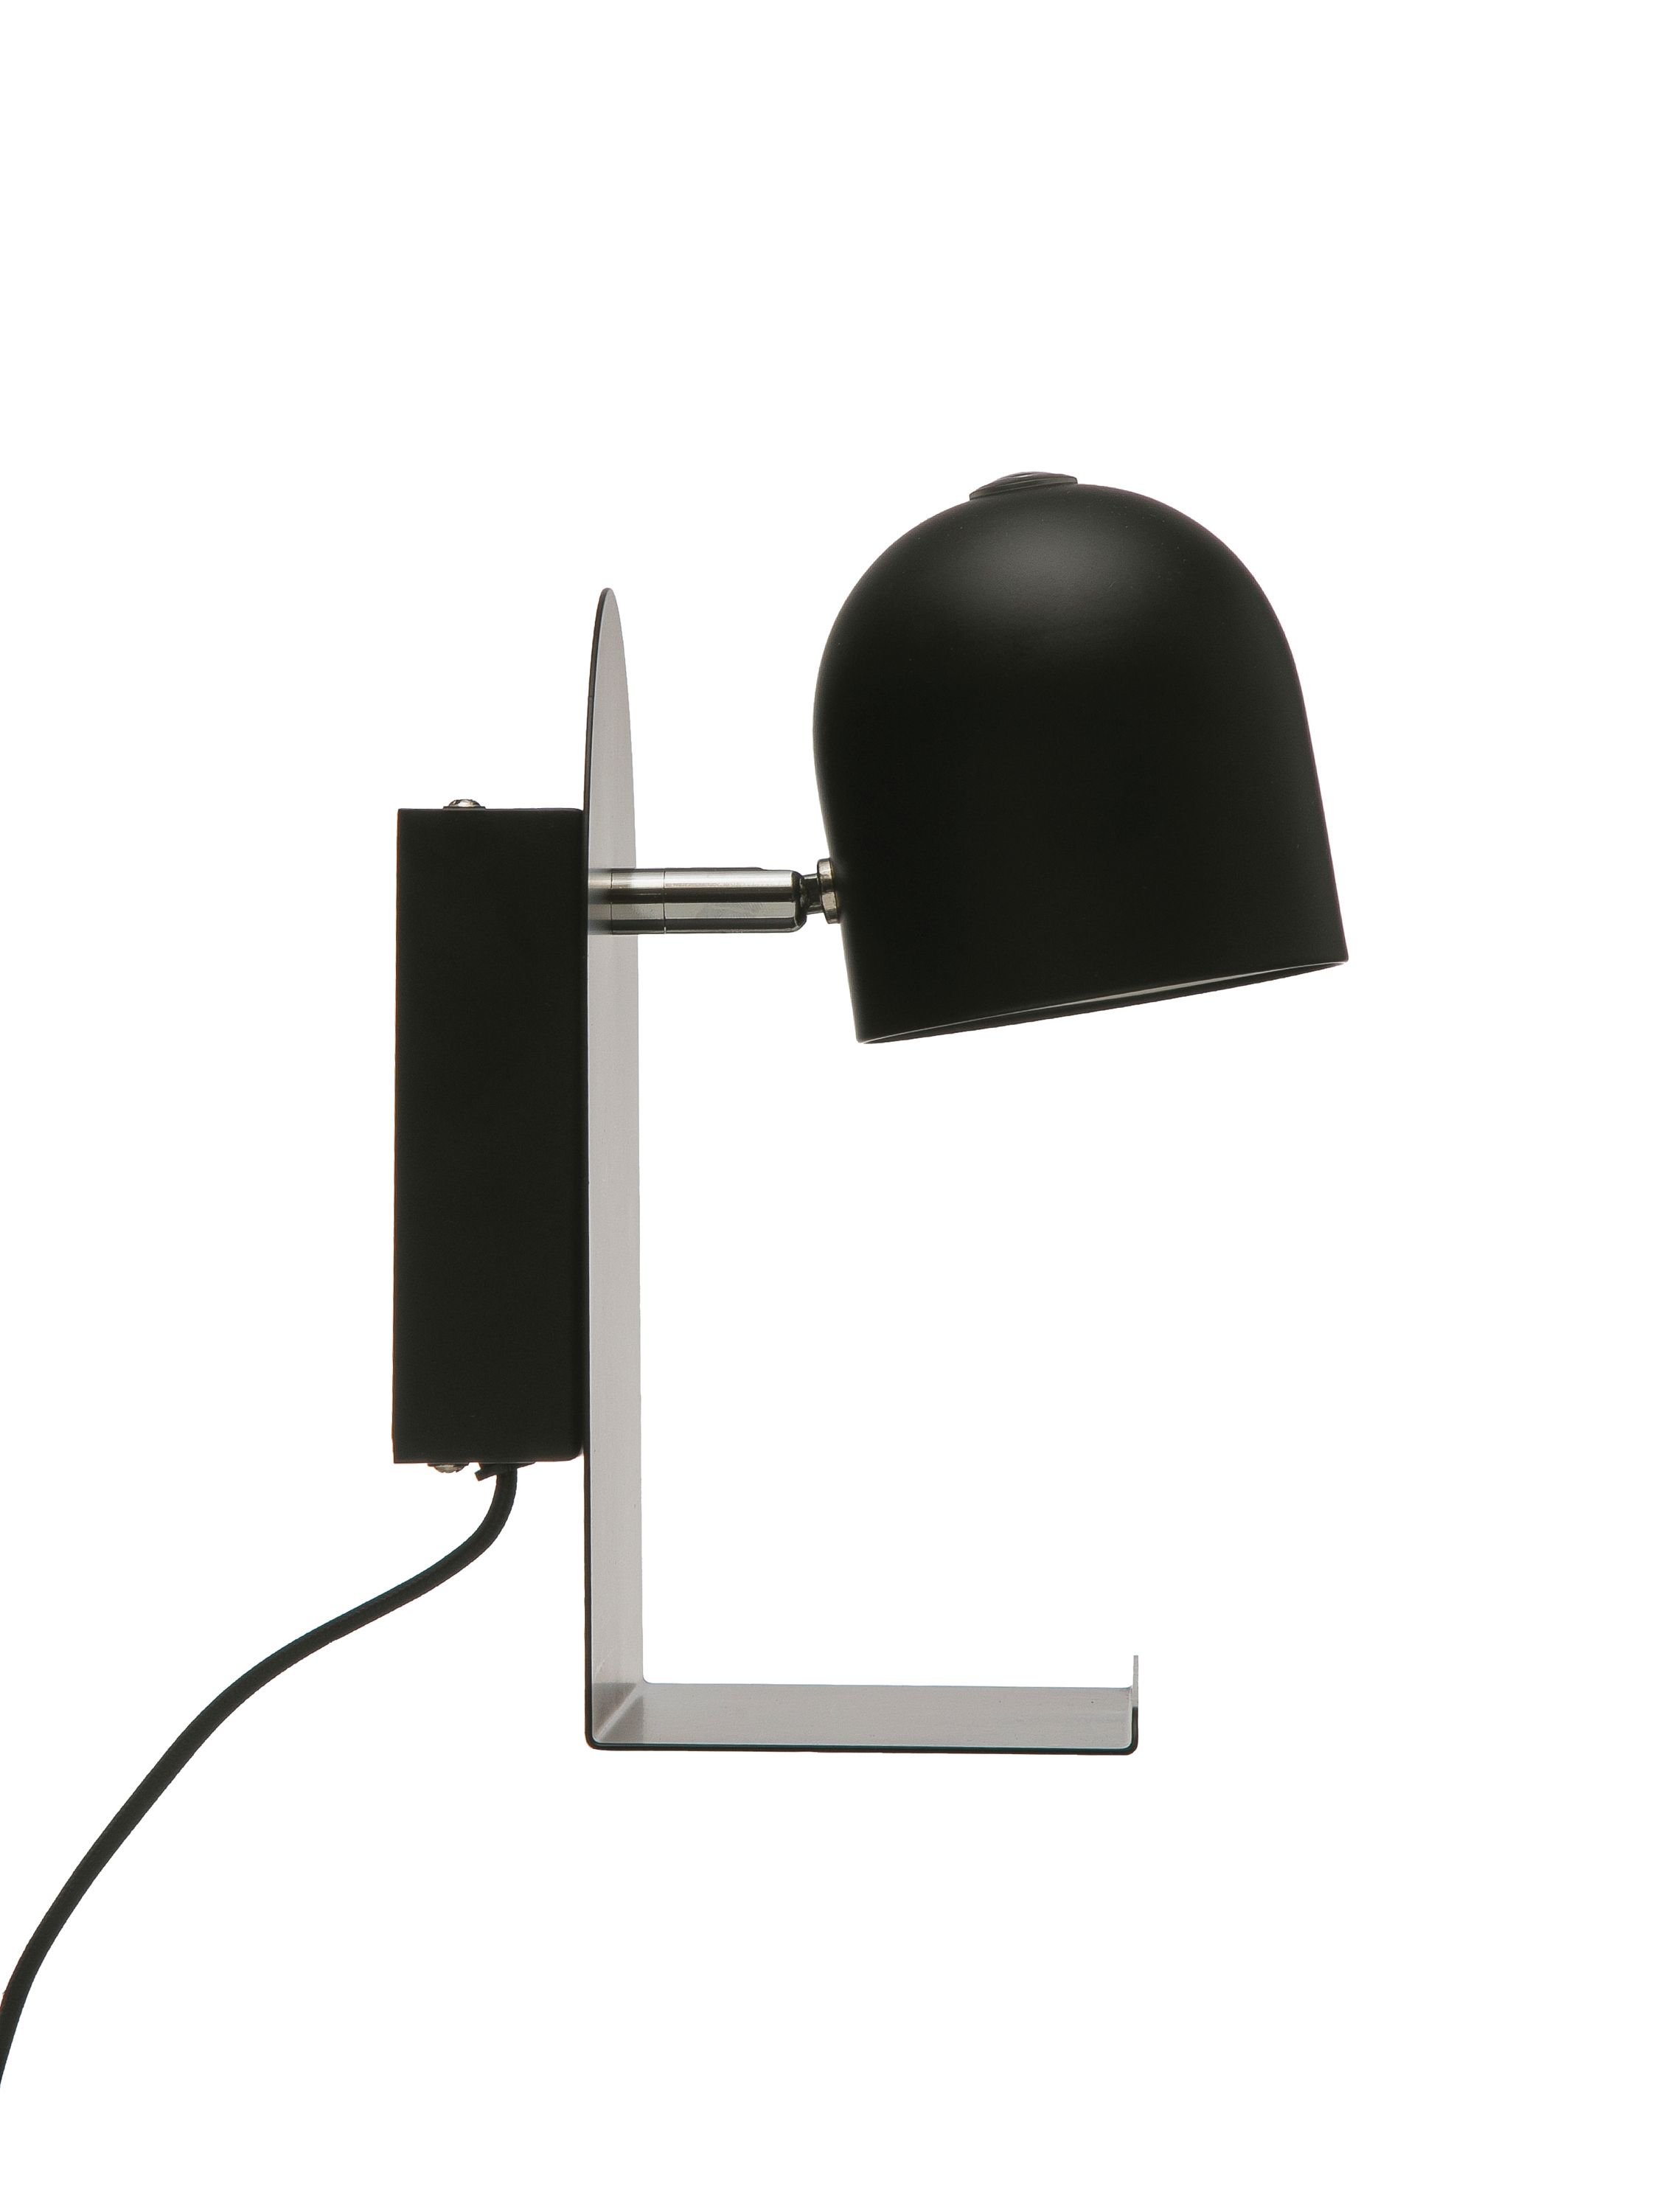 Metal LED Wall Sconce with Plug, Shelf, USB Port & Touch Switch